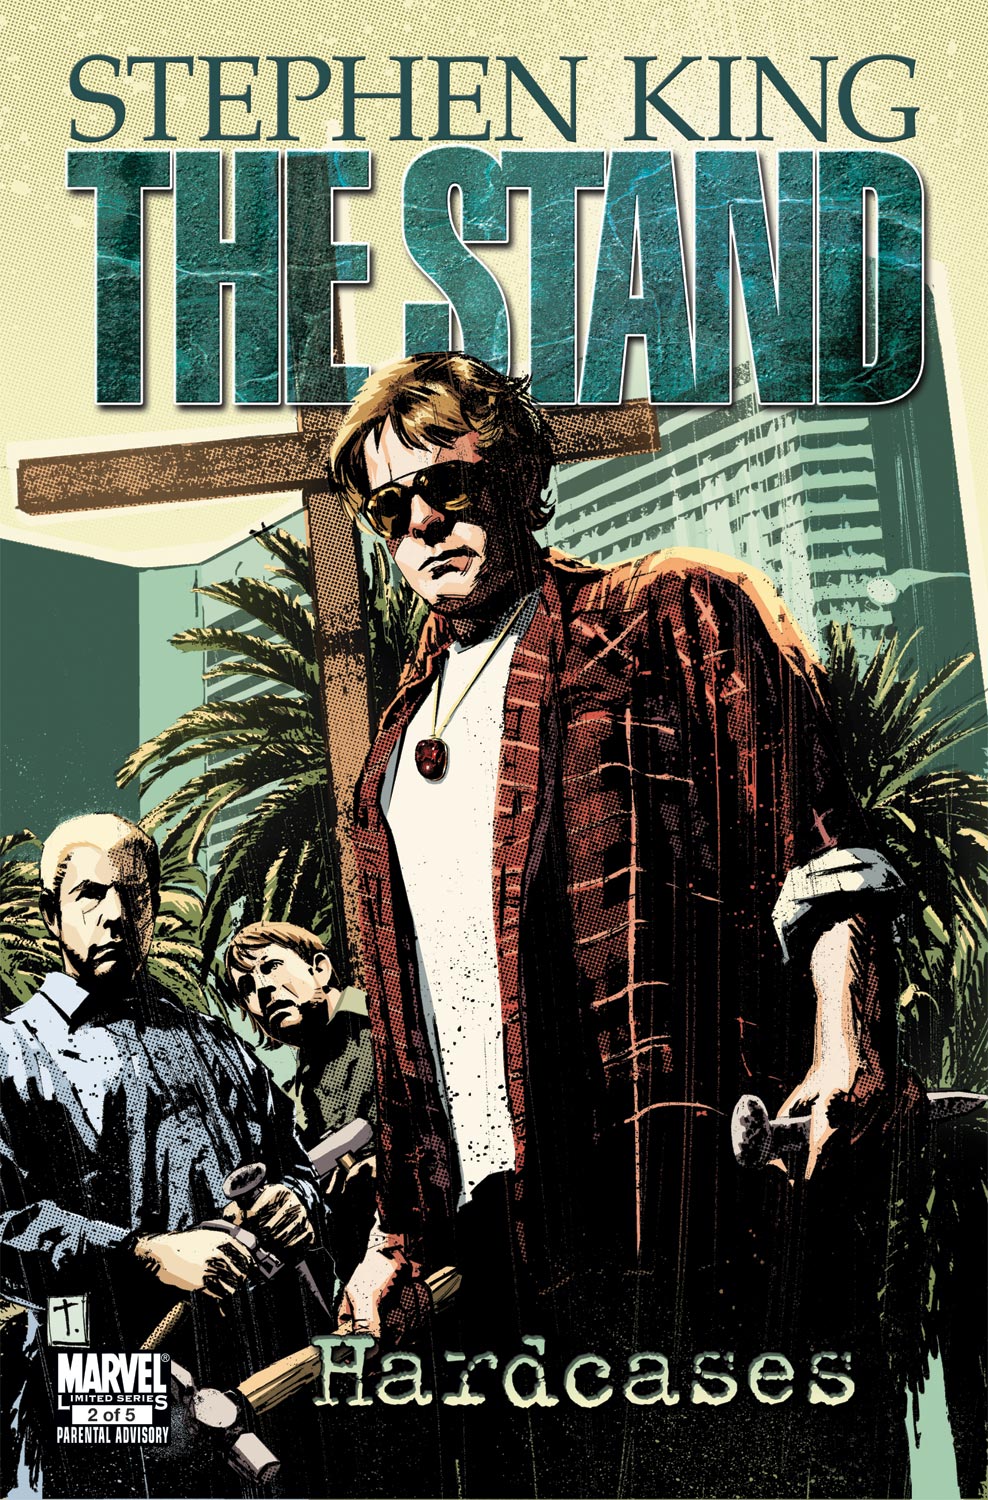 The Stand: Hardcases (2010) #2